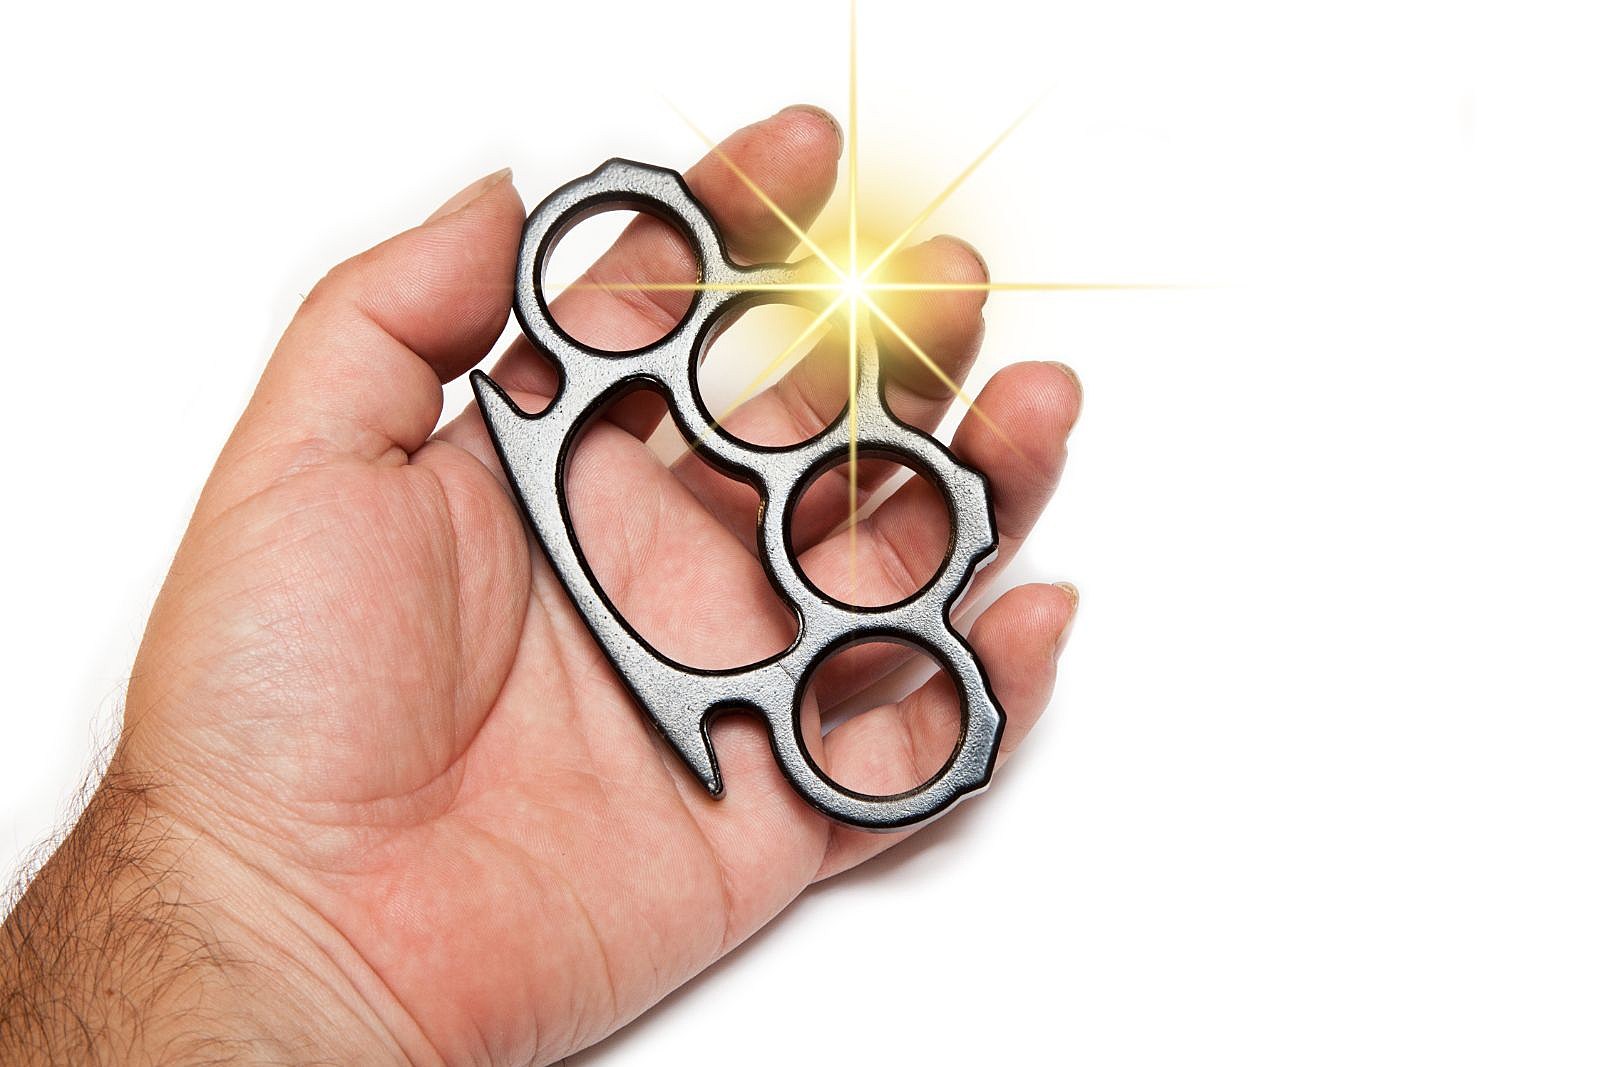 Are Brass Knuckles Illegal in Montana?